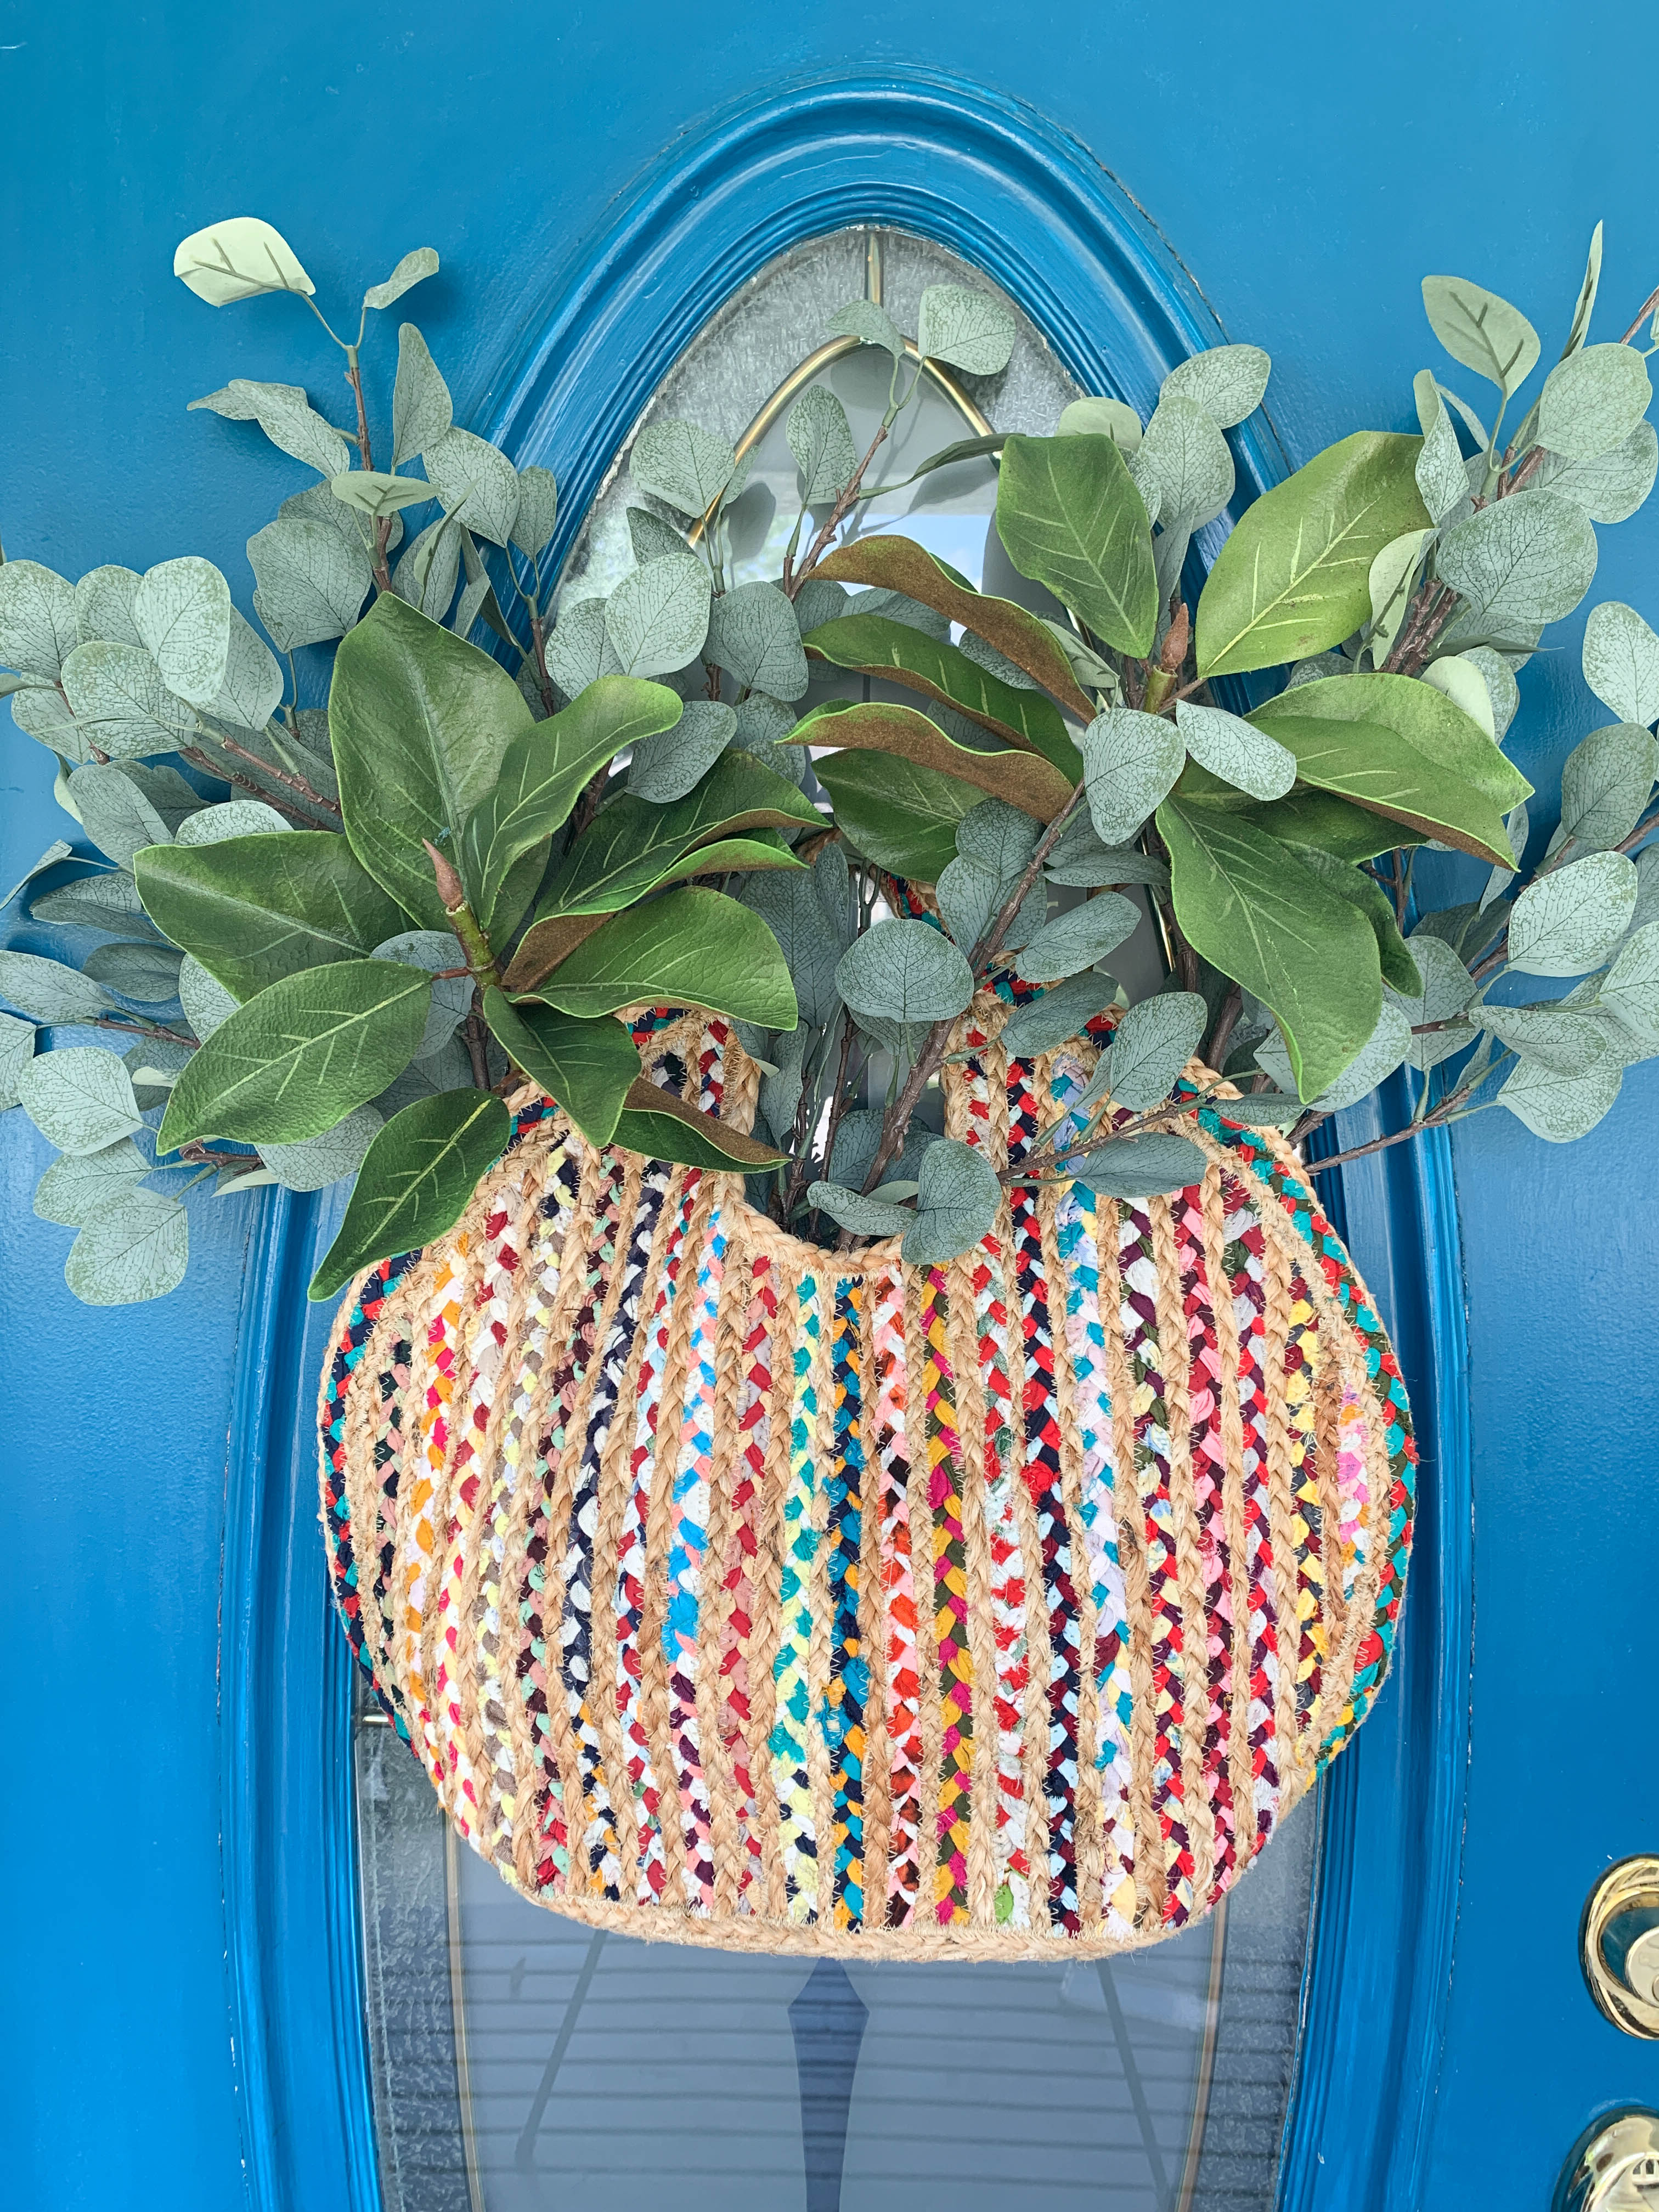 A woven purse holding magnolia leaf branches and hanging on a front door as decor.